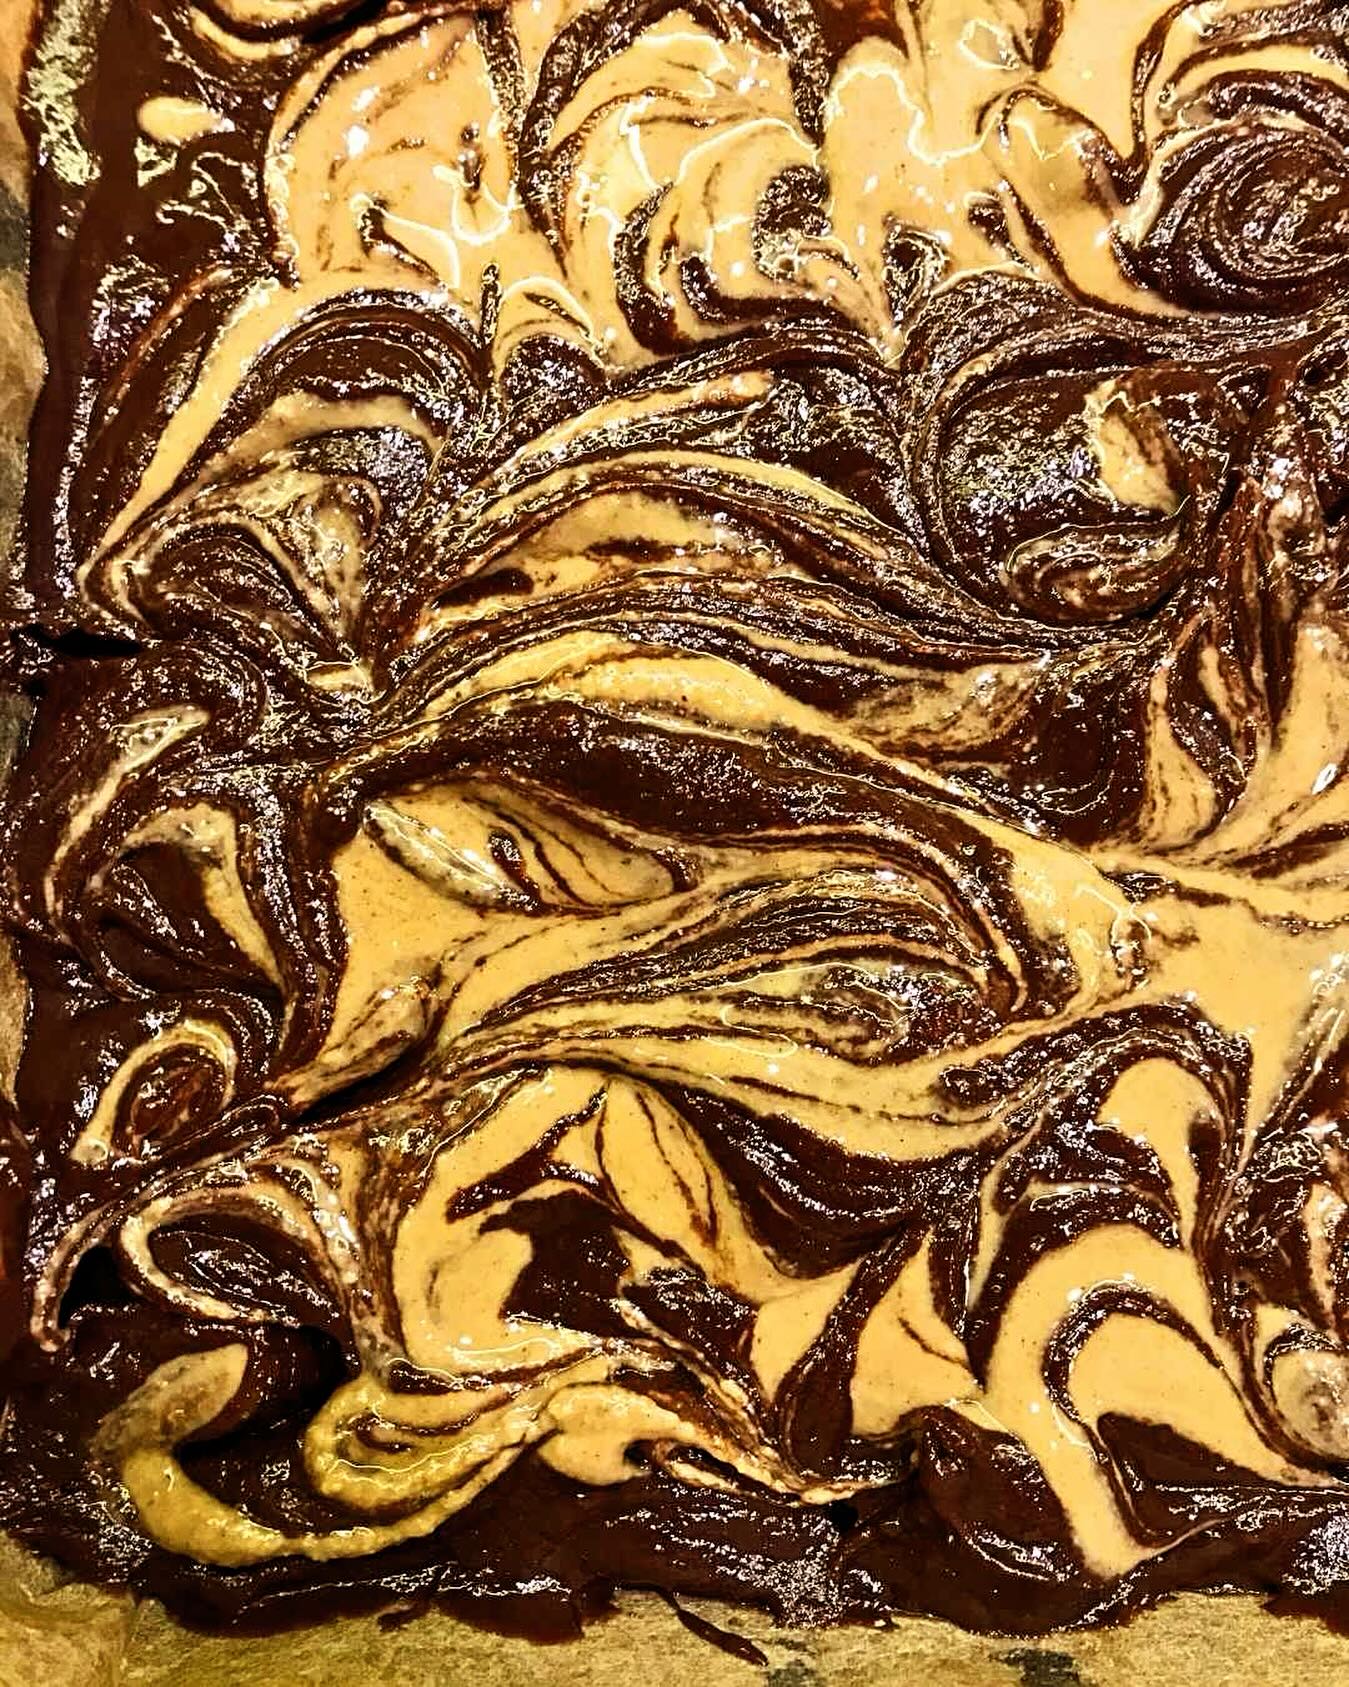 What are you baking tonight? Indulgence meets nutrition in these Tahini Dark Chocolate Brownies! Packed with the rich flavours of our dark chocolate chips and the goodness of tahini, these brownies are the perfect treat for a winter evening. The antioxidant-rich dark chocolate adds depth and is a definite mood enhancement (did you know that dark chocolate contains compounds that can stimulate the production of endorphins, which may contribute to improved mood?). Tahini is also rich in nutrients, vitamins (including B vitamins), healthy fats, high protein content and fibre To make these tahini brownies, just modify your favourite brownie recipe by incorporating tahini and dark chocolate.